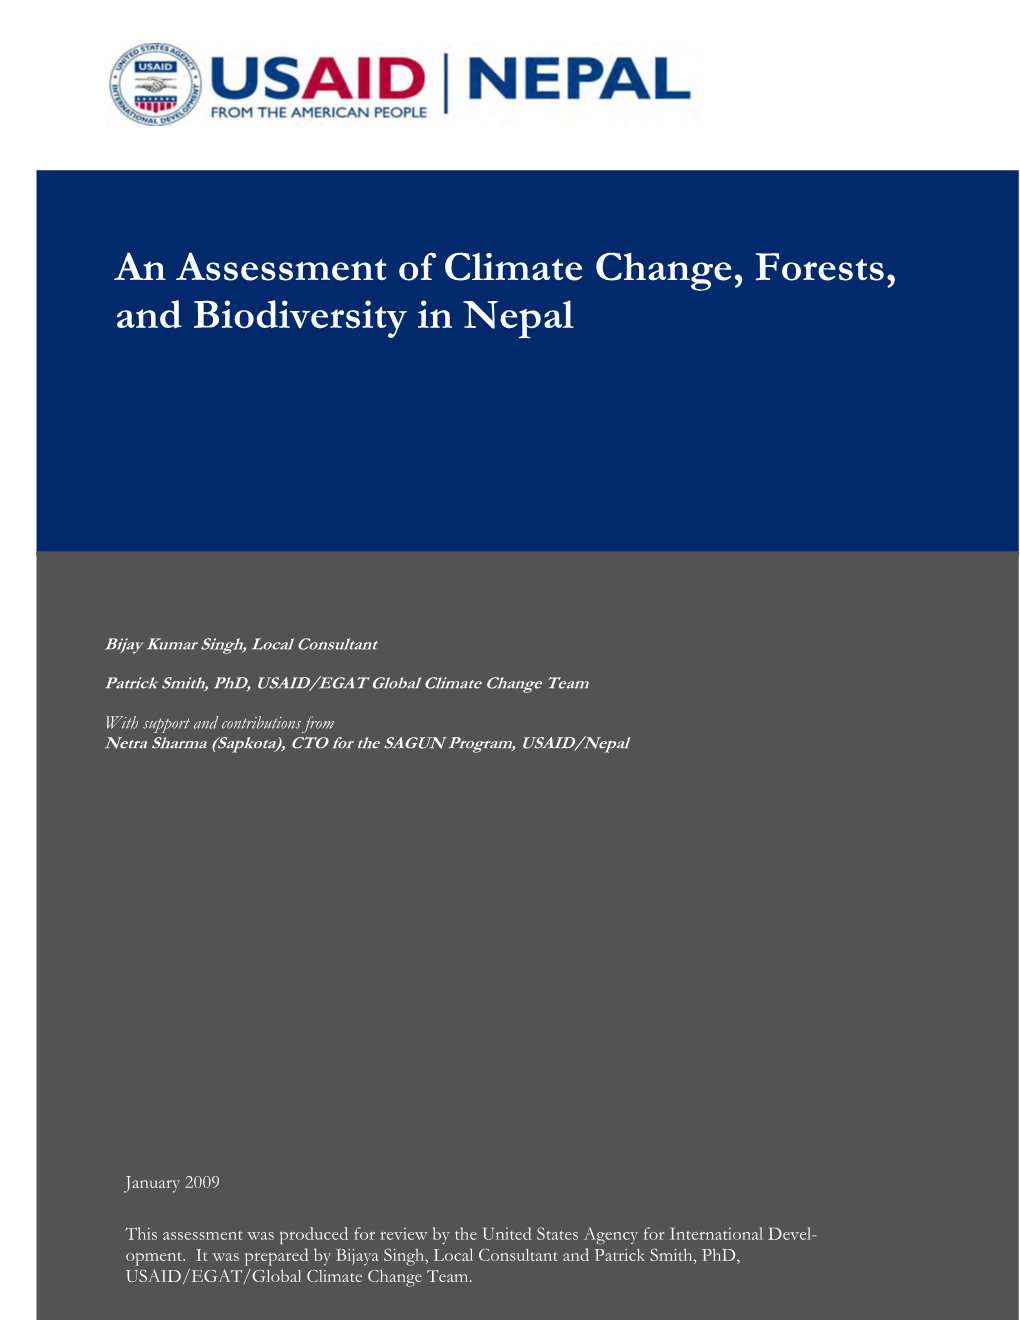 An Assessment of Climate Change, Forests, and Biodiversity in Nepal